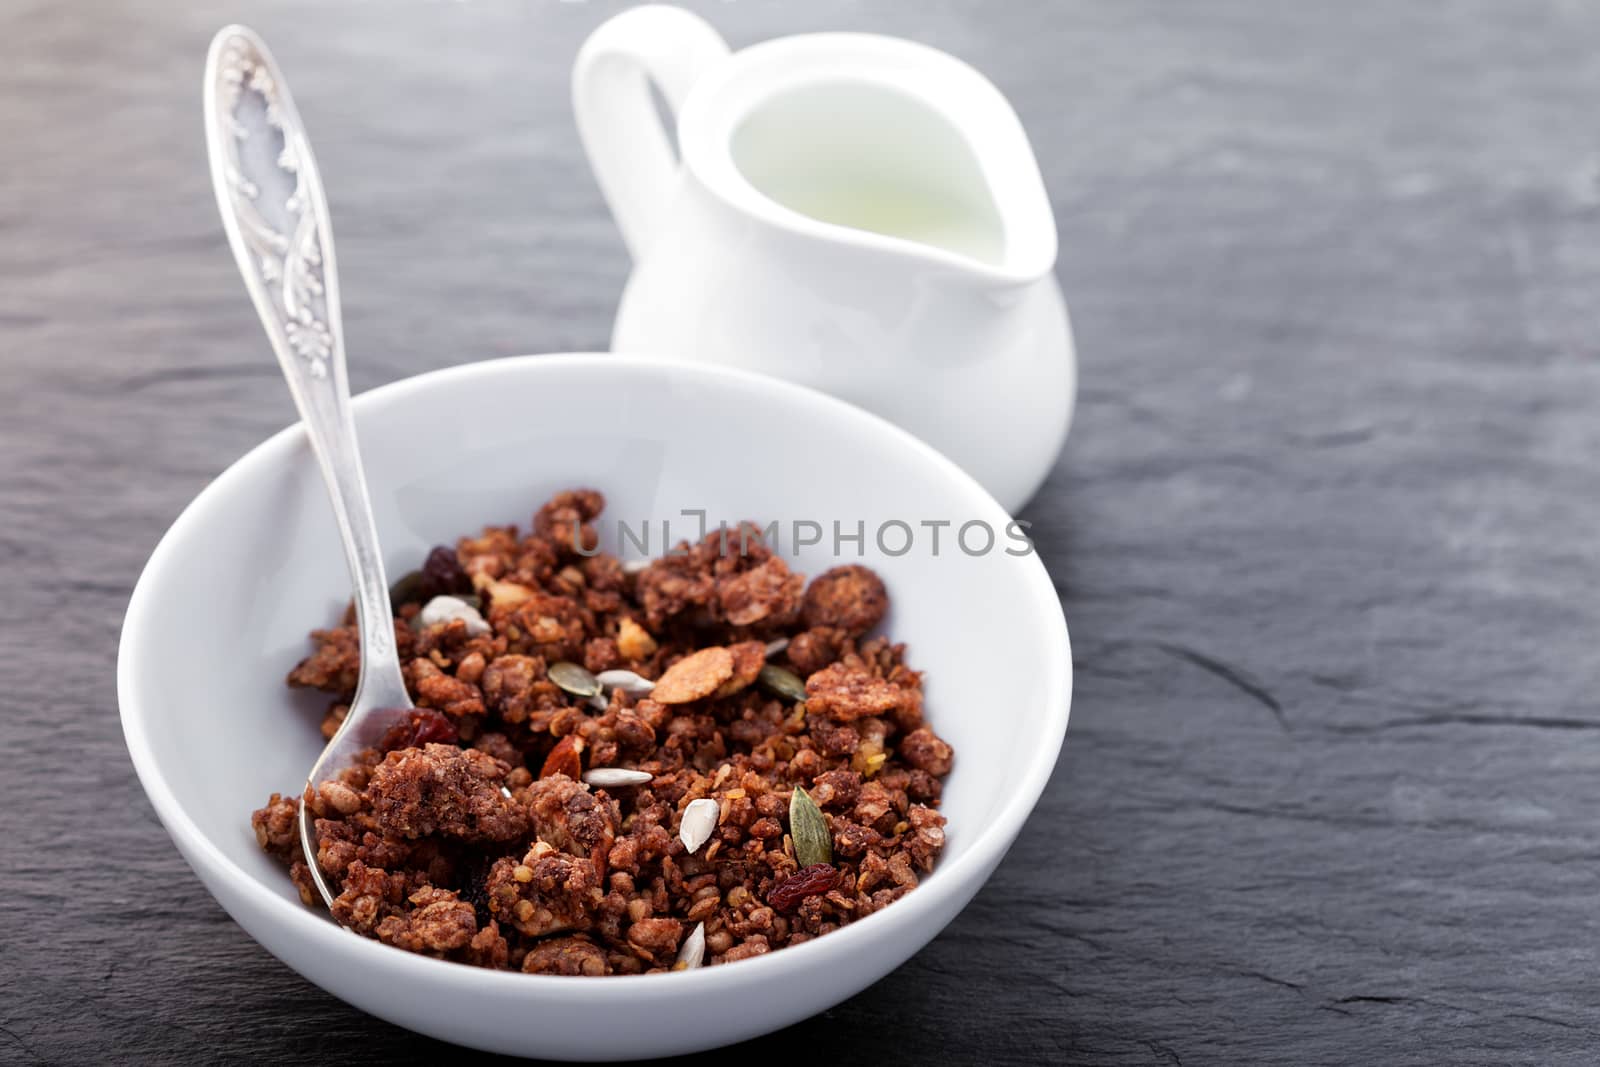 Granola - Healthy Chocolate Oat Bars in a white plate by supercat67